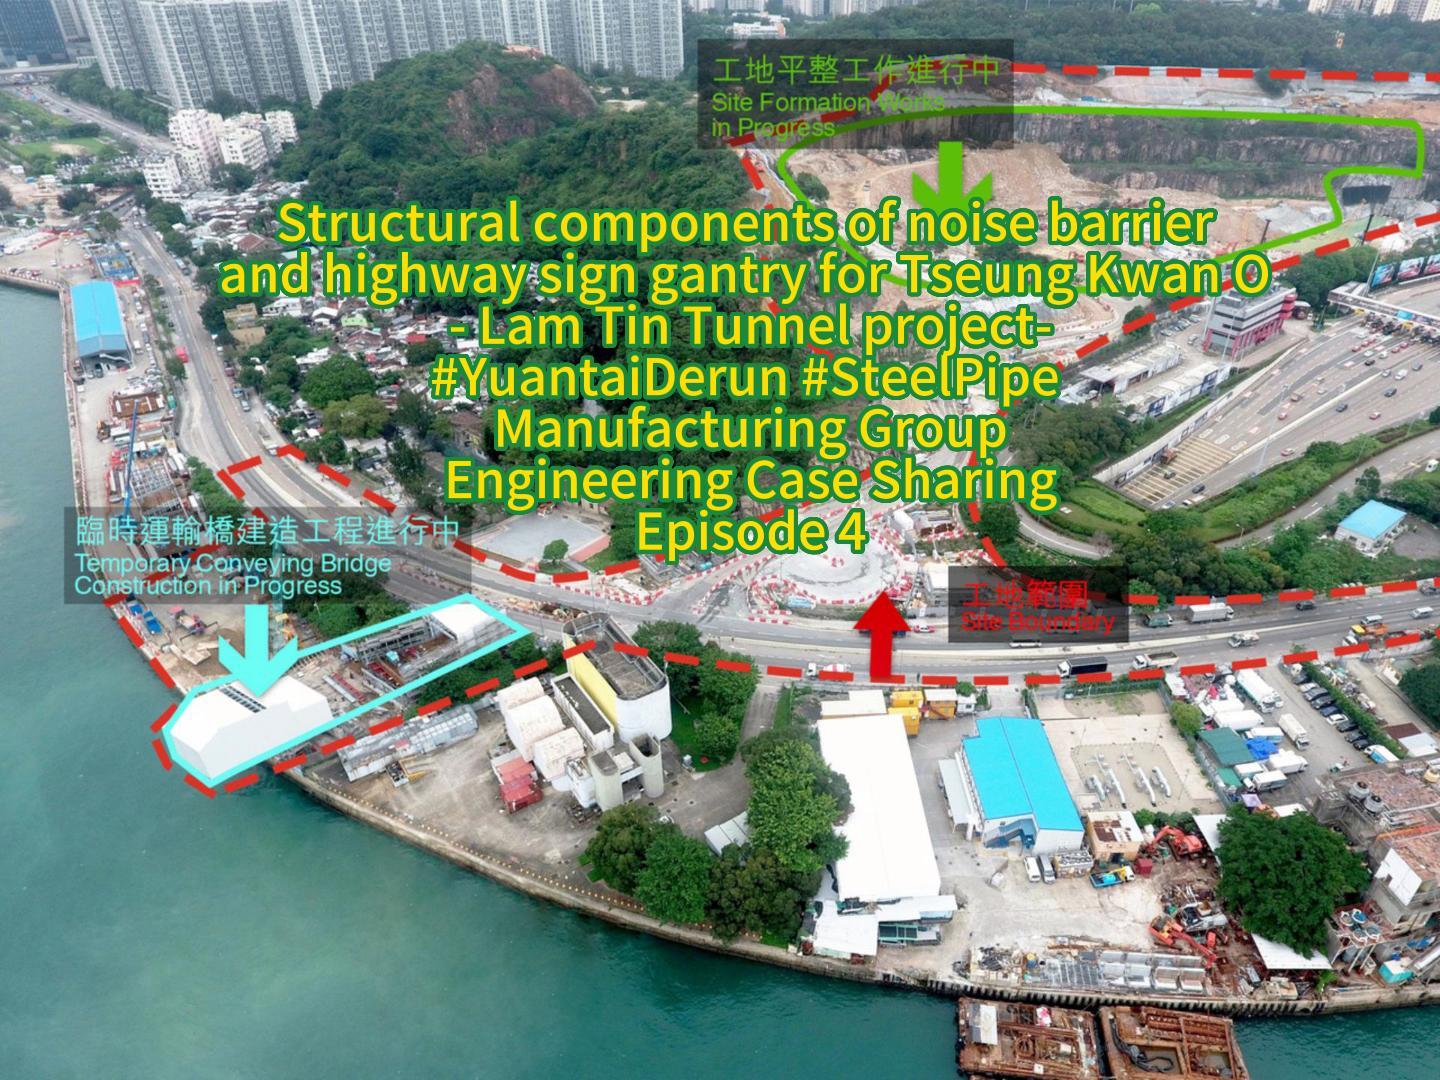 Structural components of noise barrier and highway sign gantry for Tseung Kwan O - Lam Tin Tunnel project-Yuantai Derun Steel Pipe Manufacturing Group Project Case Episode 4